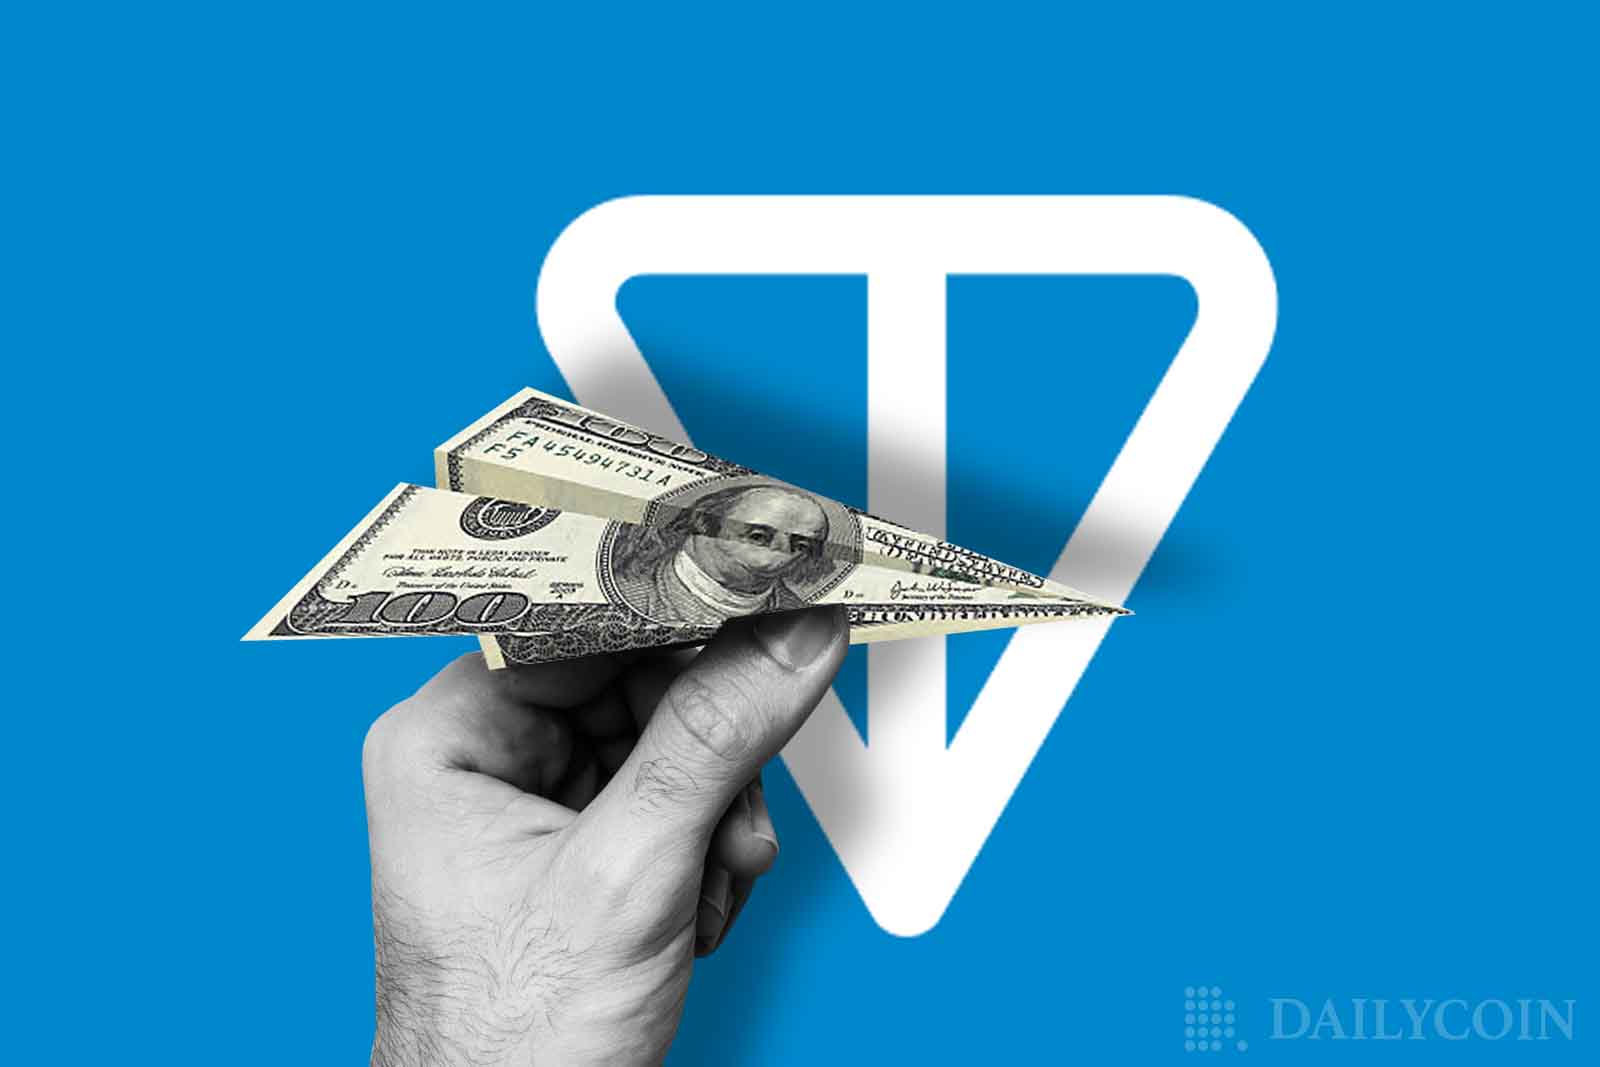 TON logo with a man holding a paper plane made from US currency.